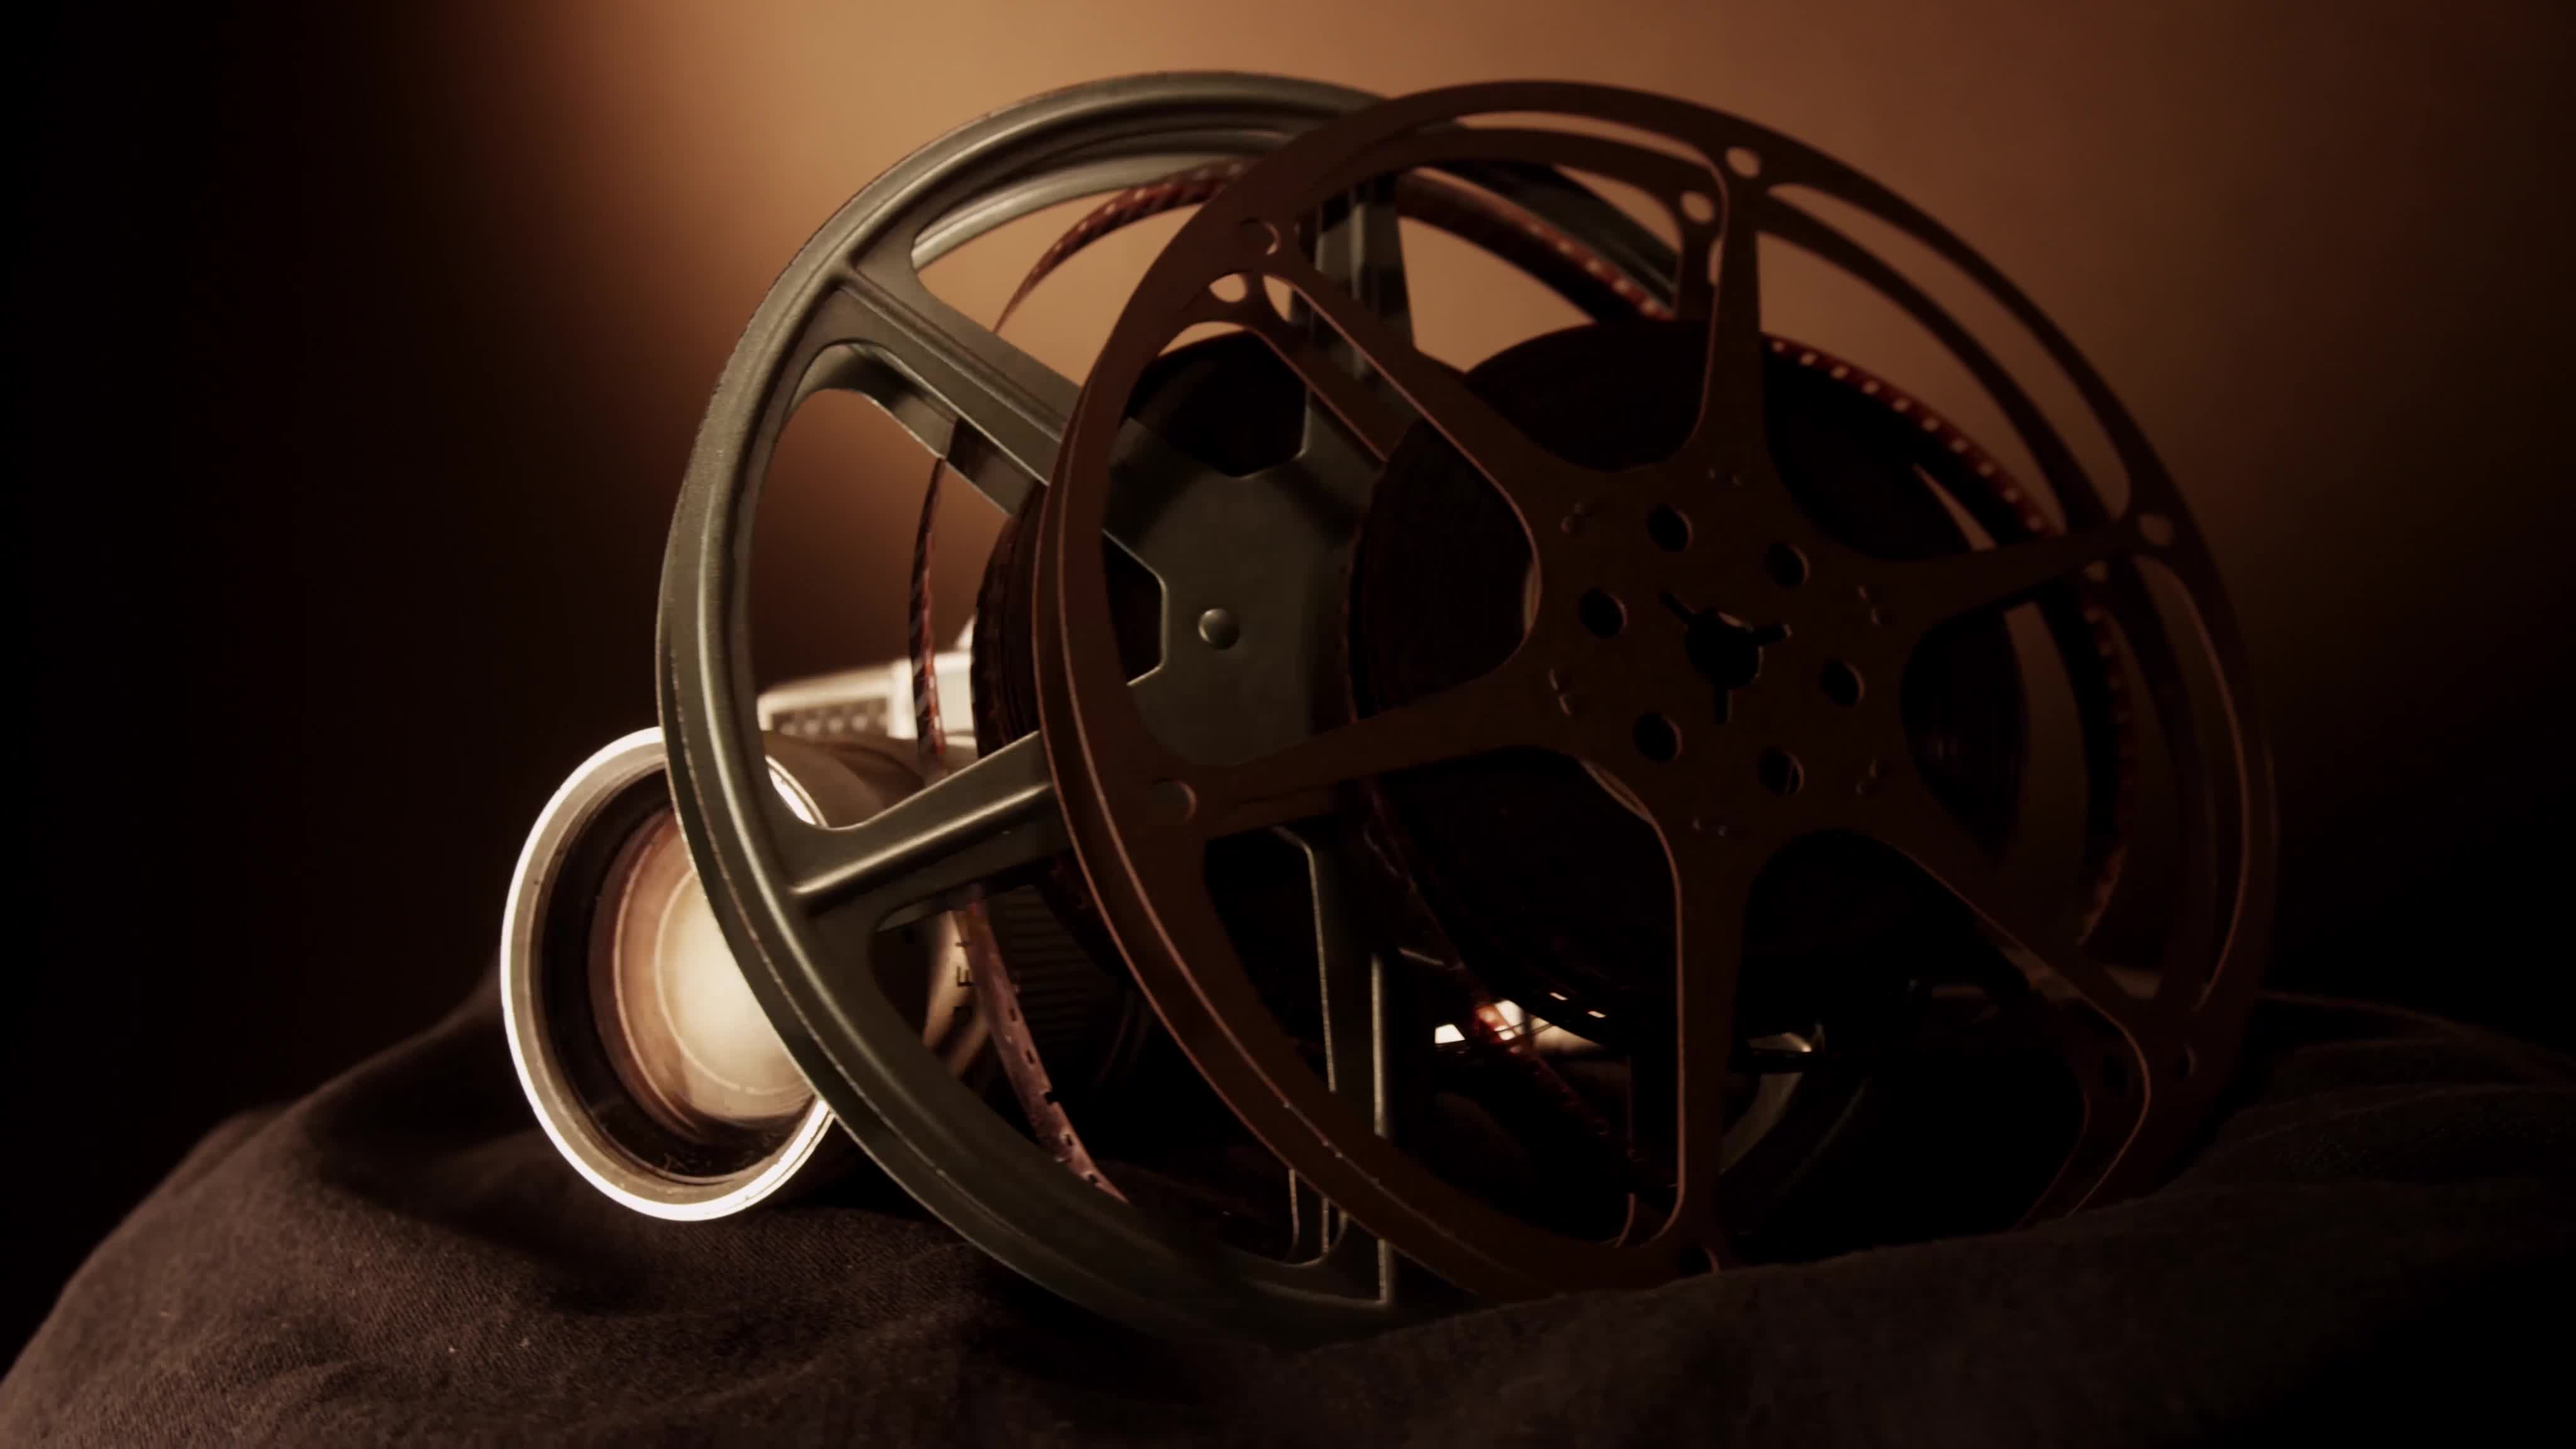 Close up of two film reels spinning beside a classic camera on